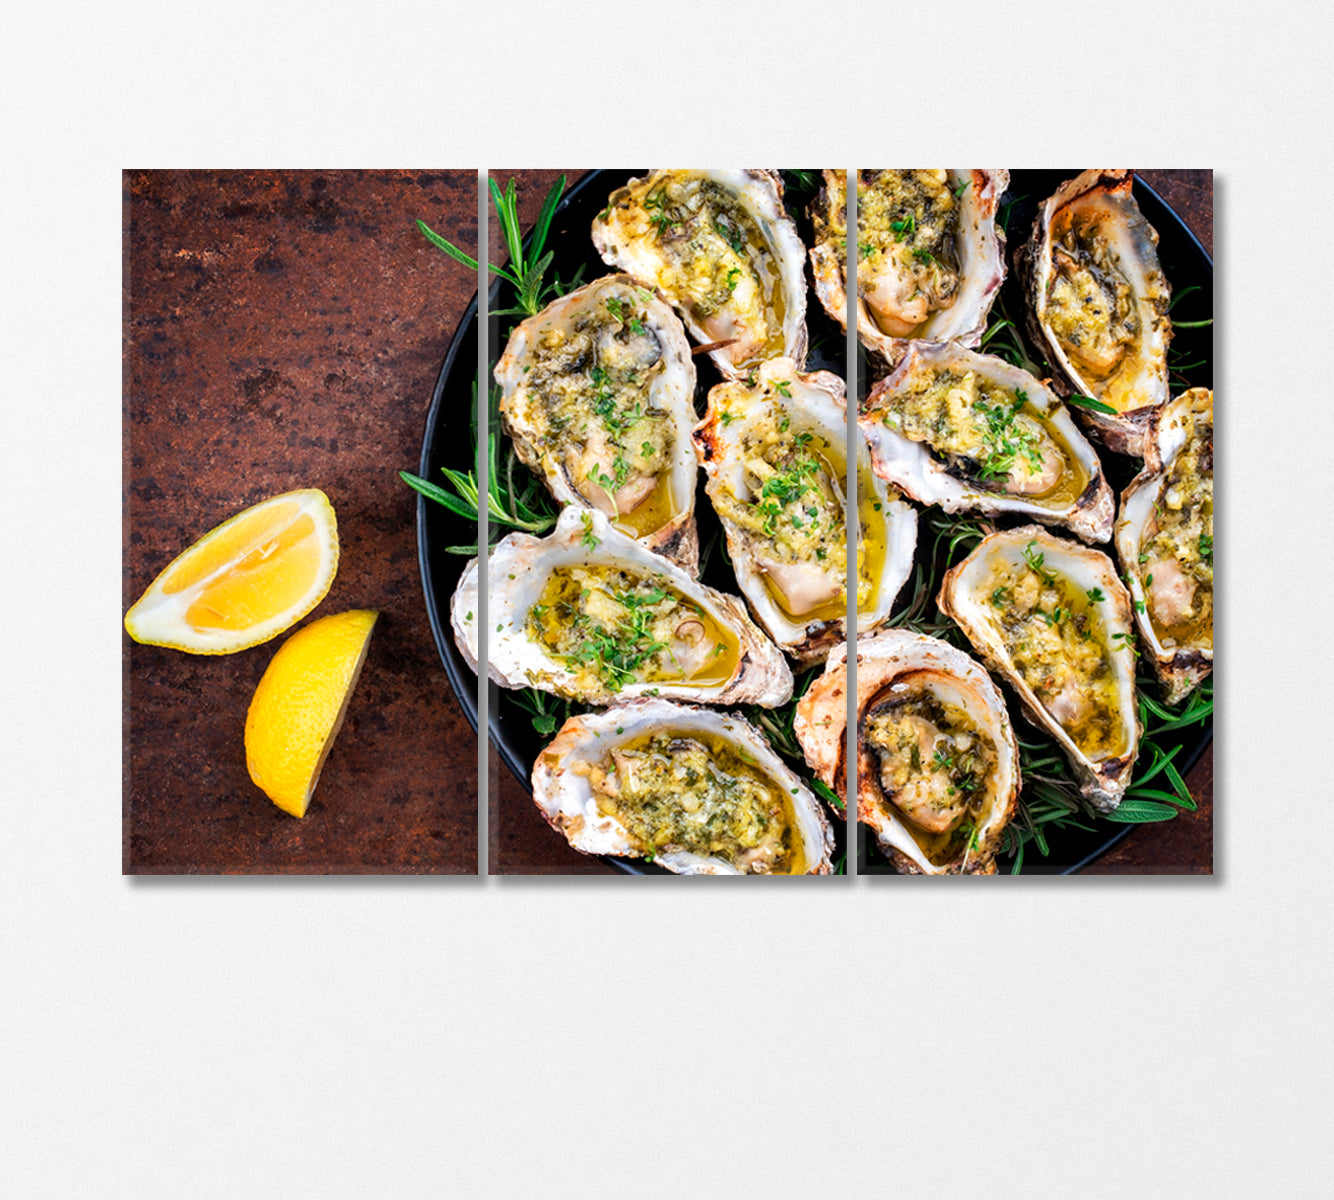 Baked Oysters with Lemon and Herbs Canvas Print-Canvas Print-CetArt-3 Panels-36x24 inches-CetArt